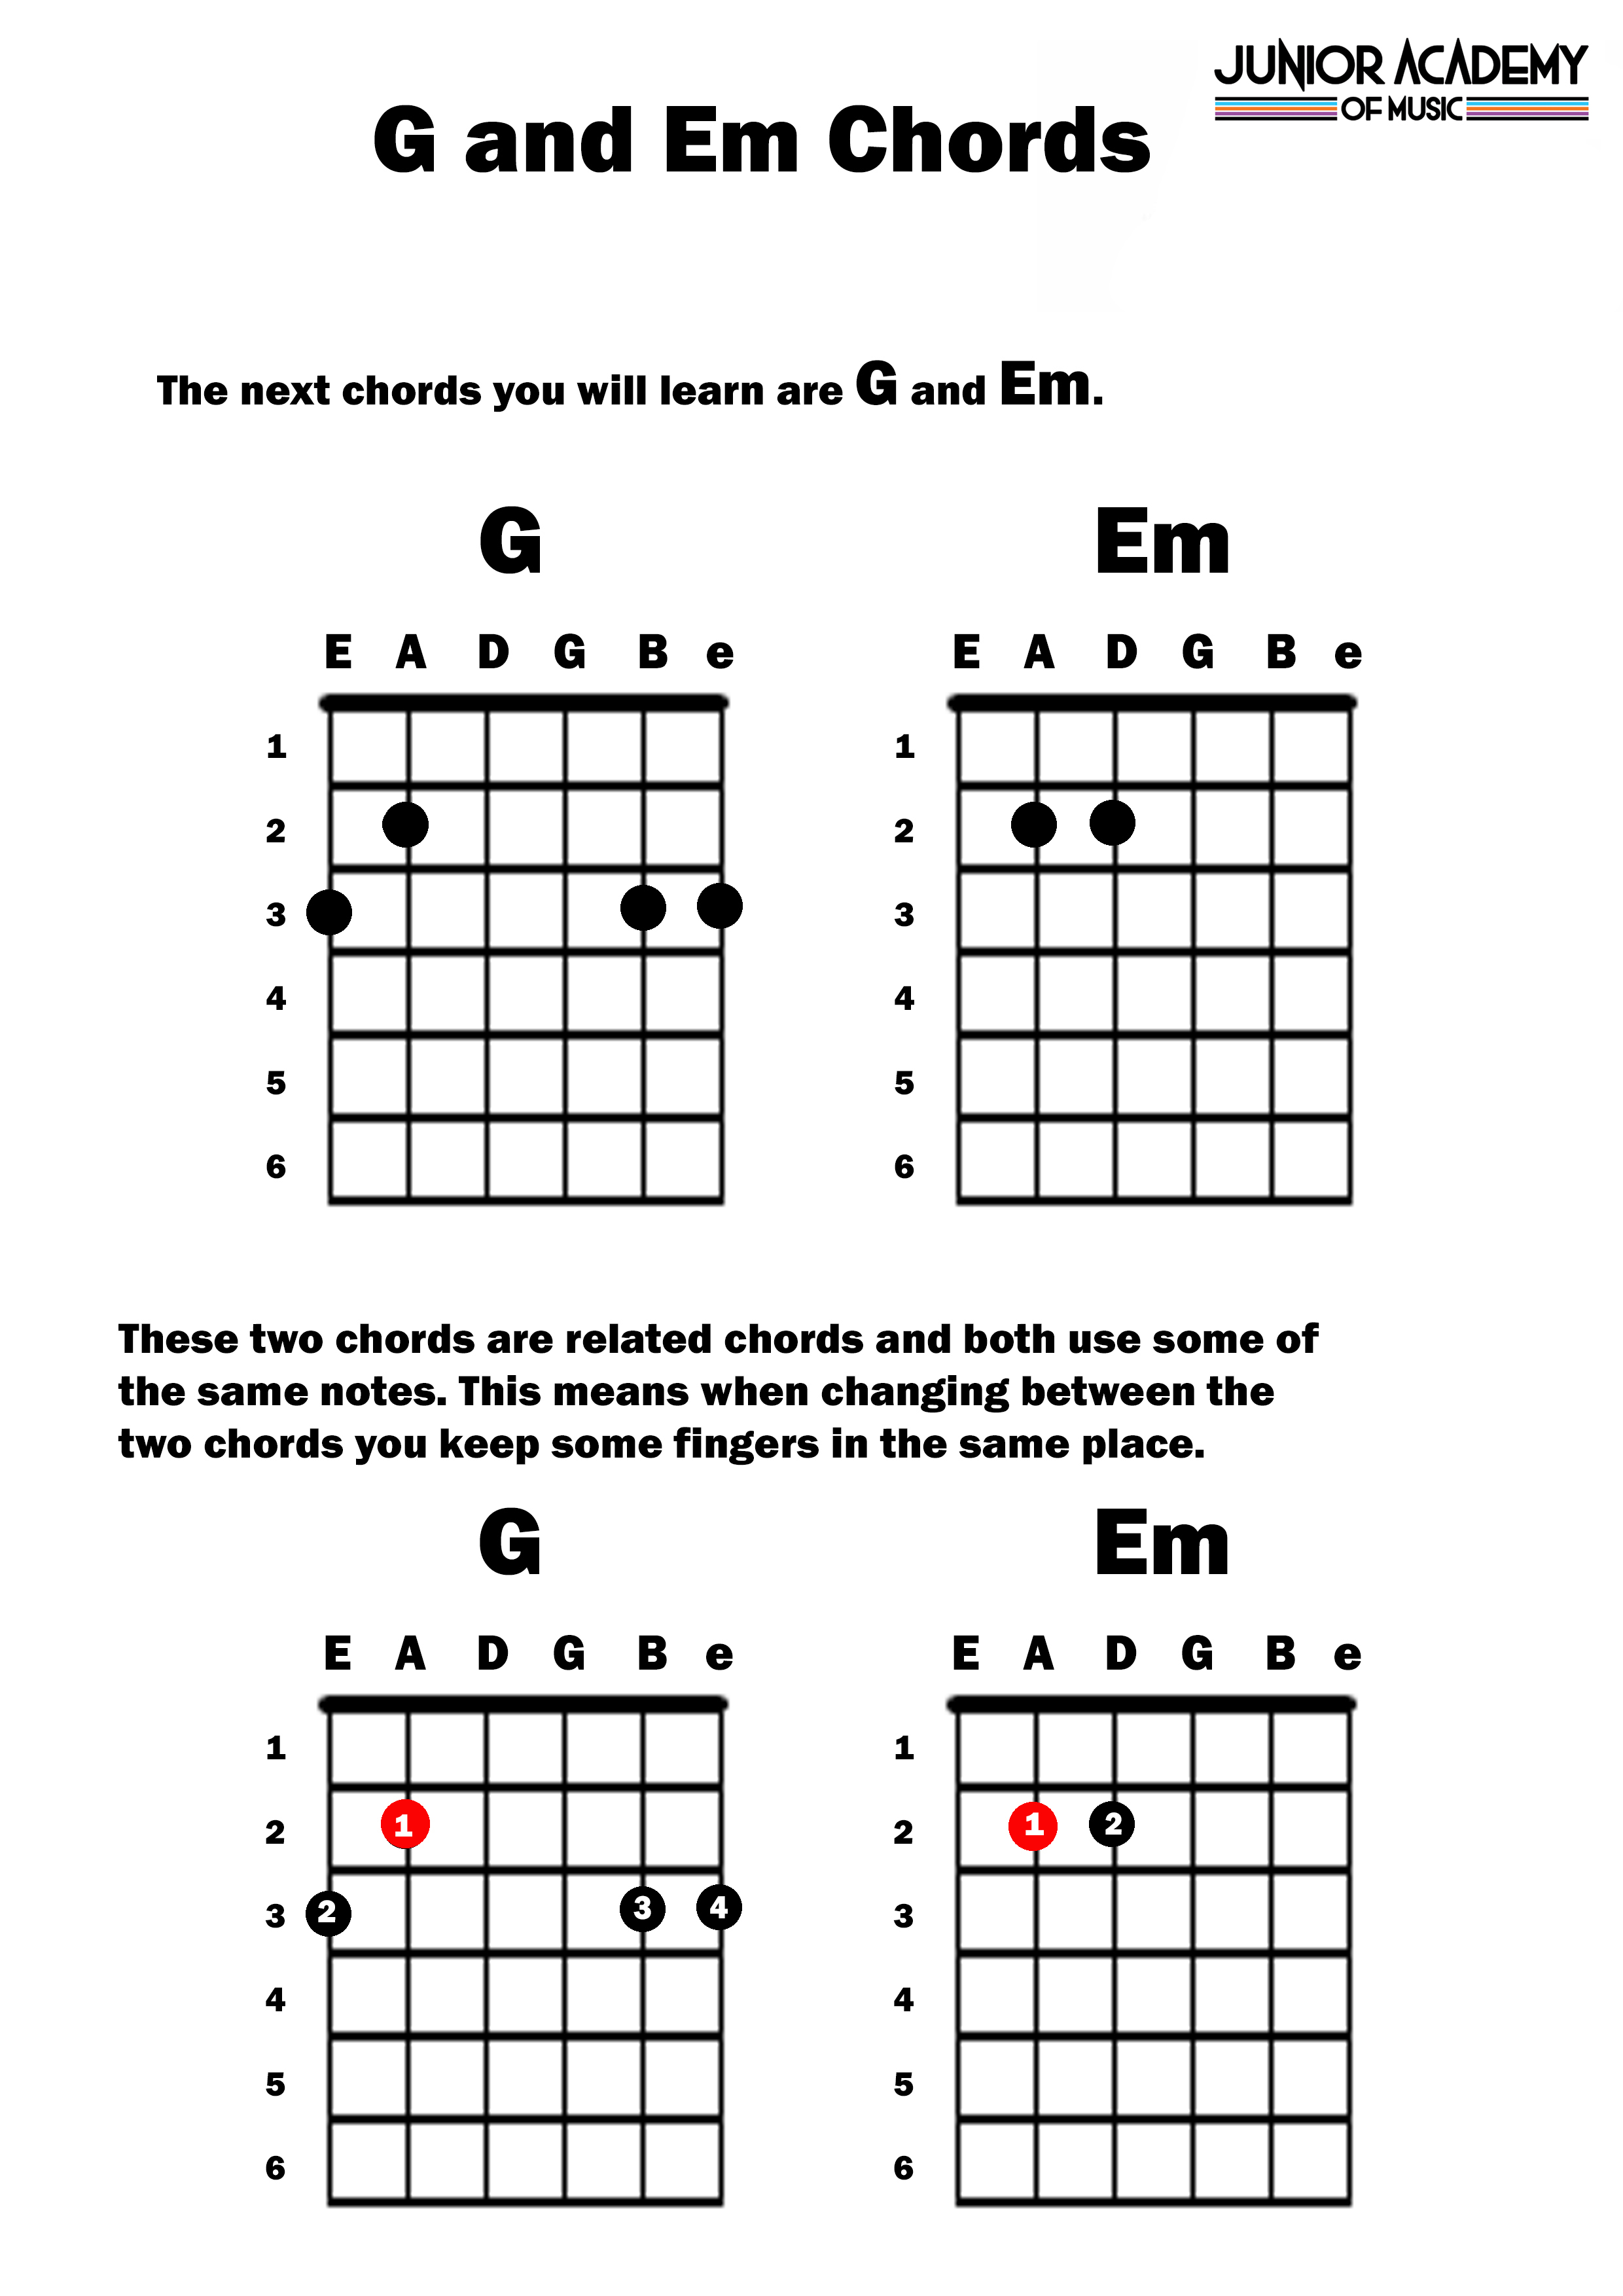 bubbly guitar chords for beginners